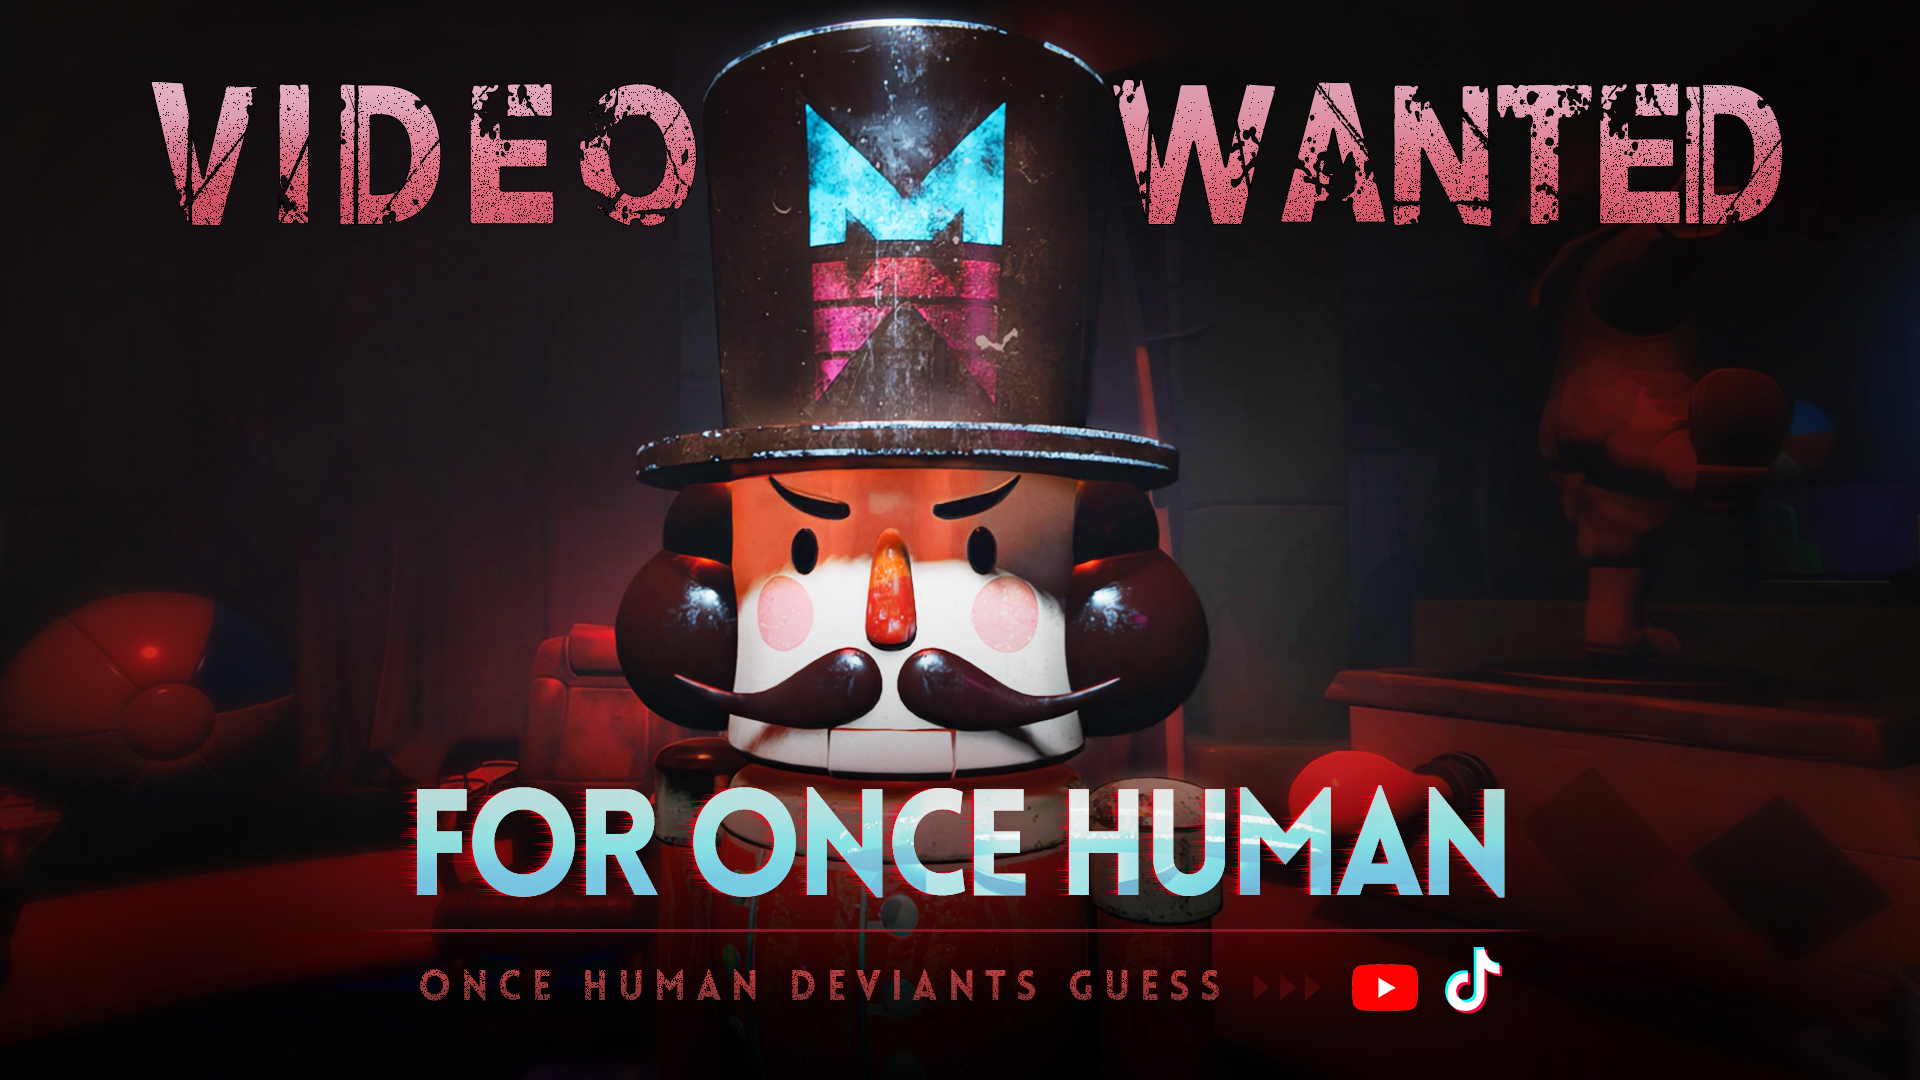 ONCE HUMAN DEVIANTS GUESS: POST A VIDEO AND GET CASH REWARDS!